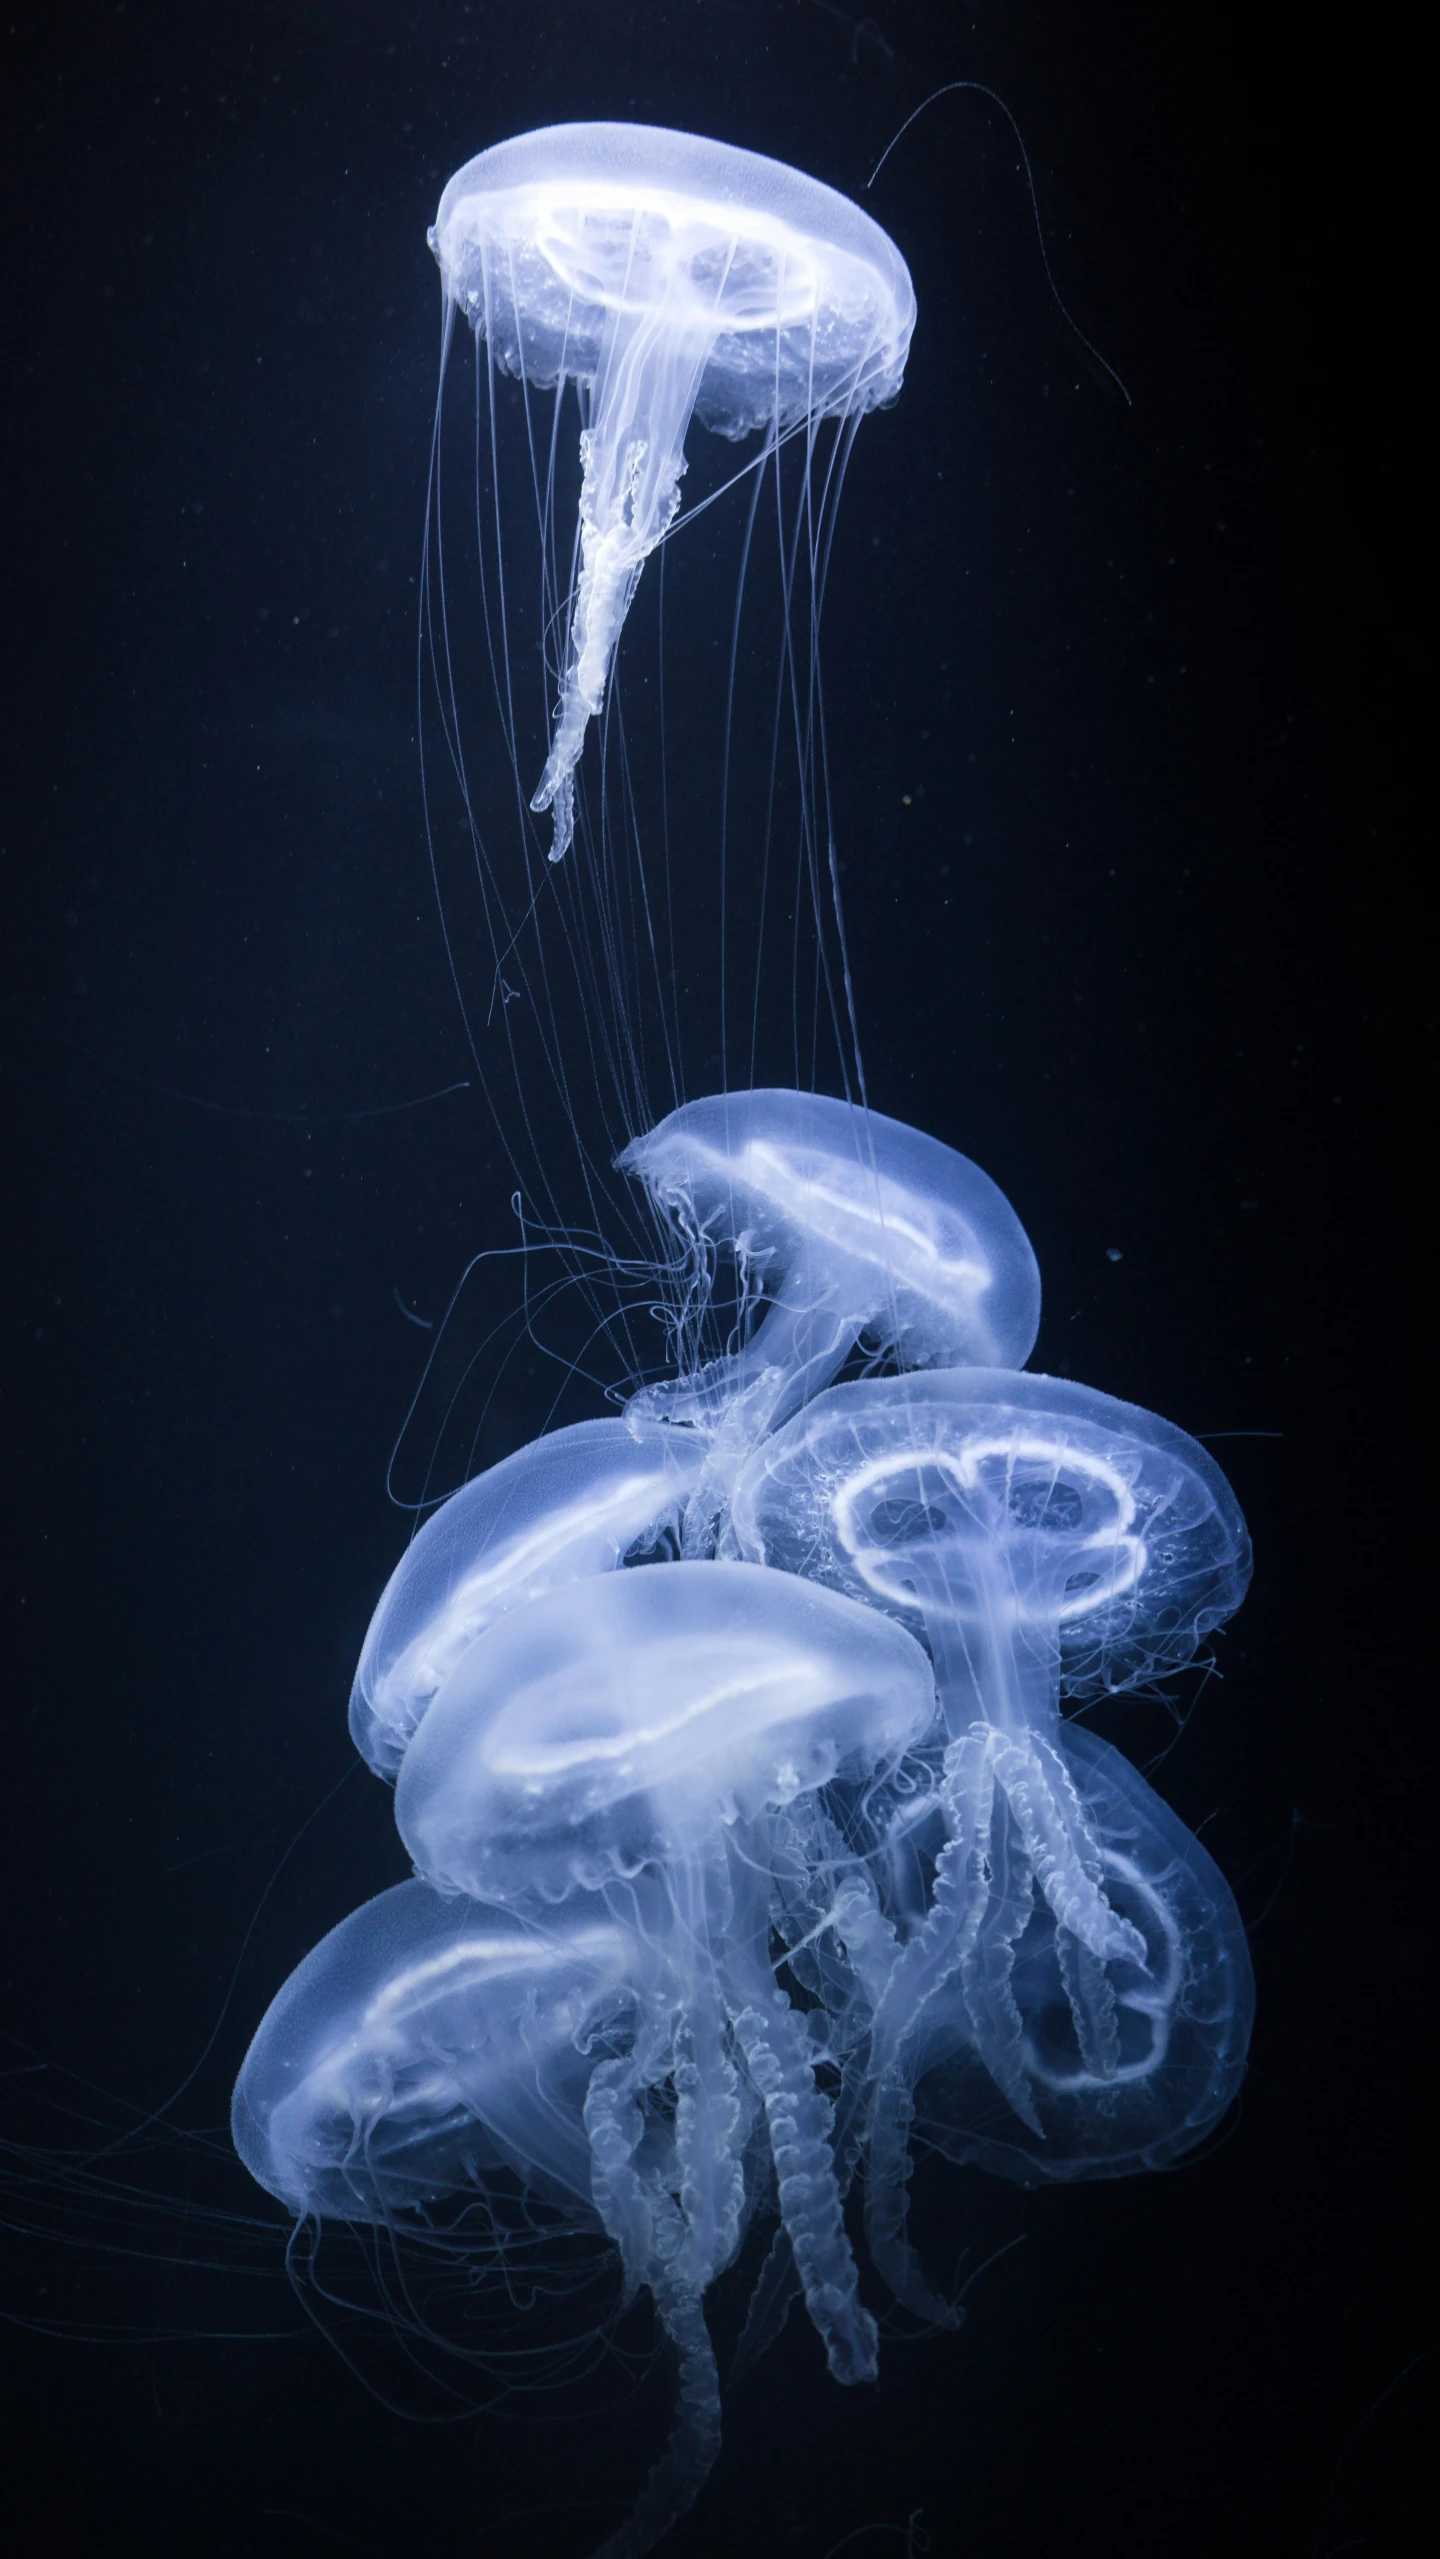 several jelly fish floating under water on a dark surface